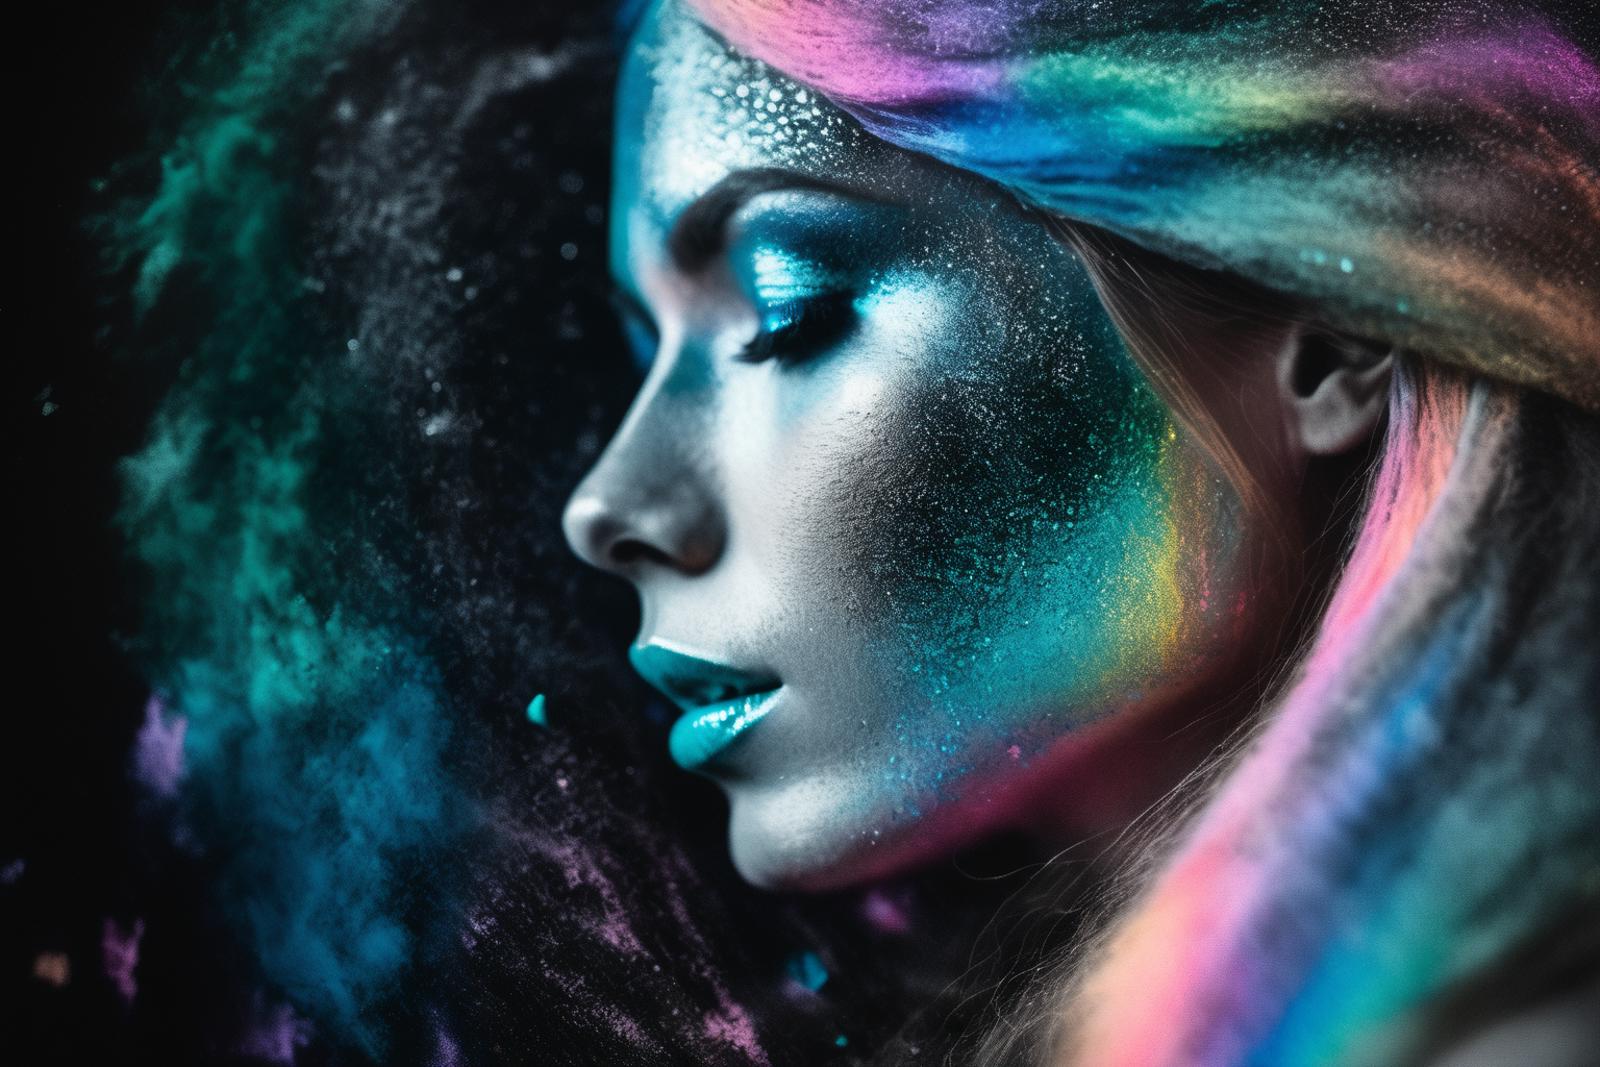 A woman with makeup on her face and a rainbow effect on her hair.